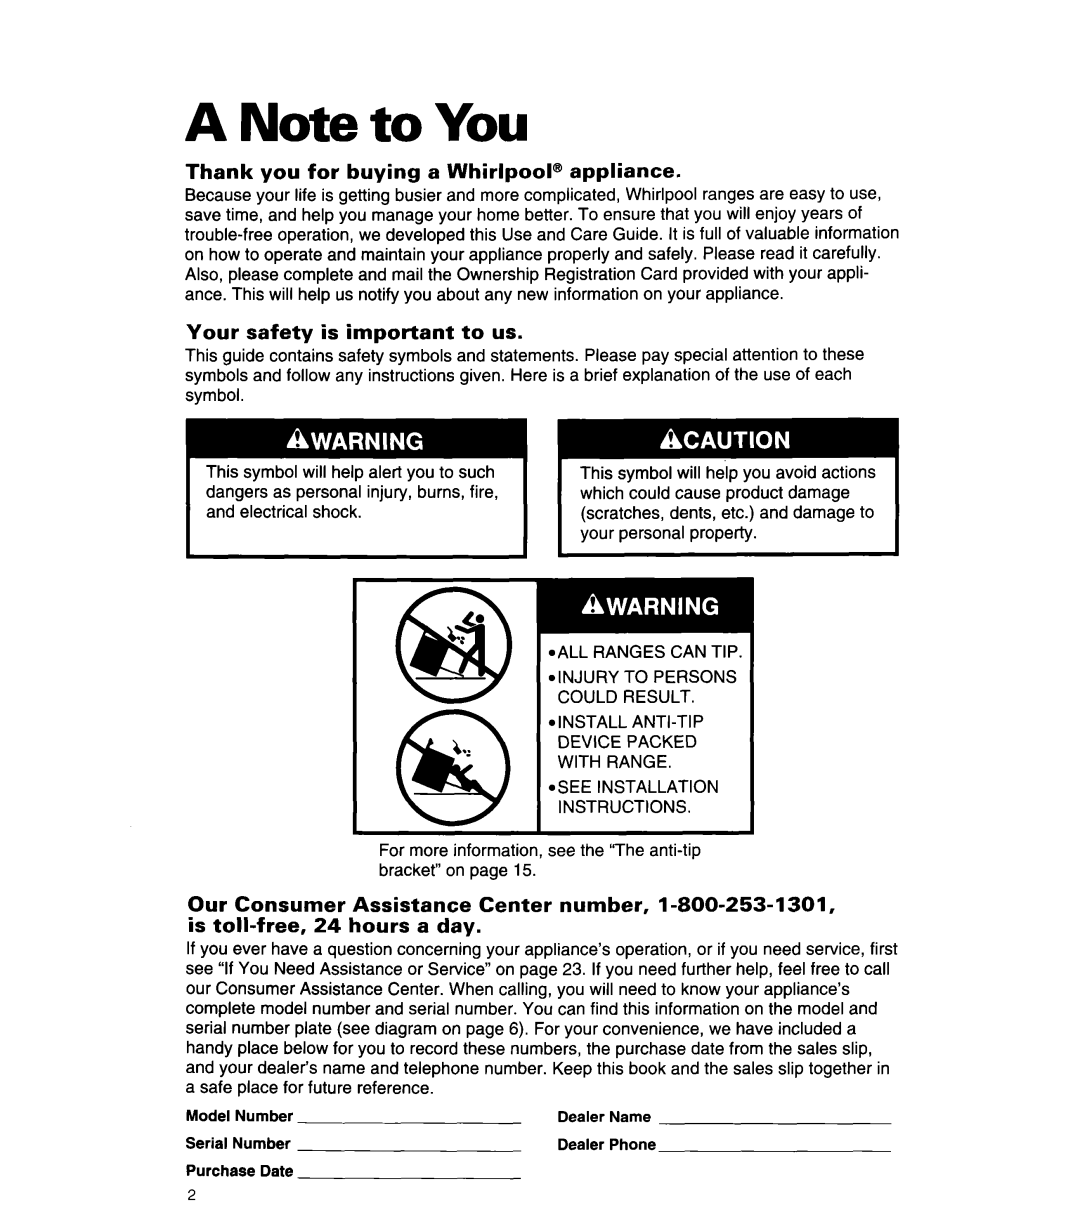 Whirlpool SF3020SW/EW manual A Note to You, Thank you for buying a Whirlpool@ appliance, Your safety is important to us 